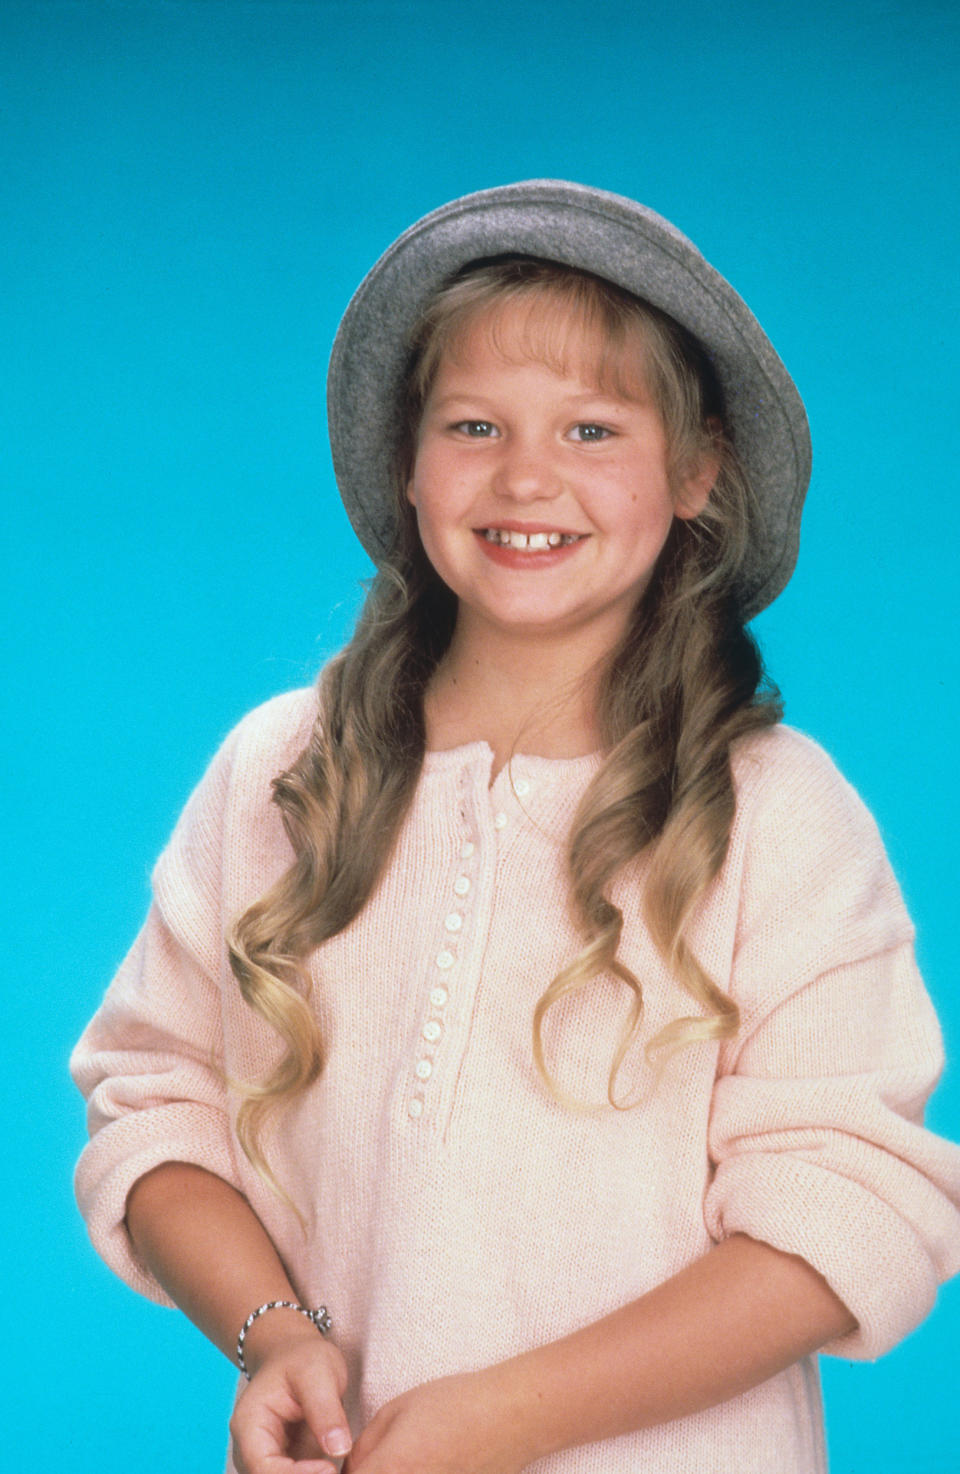 At age 11, Candace Cameron Bure was starred in Full House as D.J. Tanner.